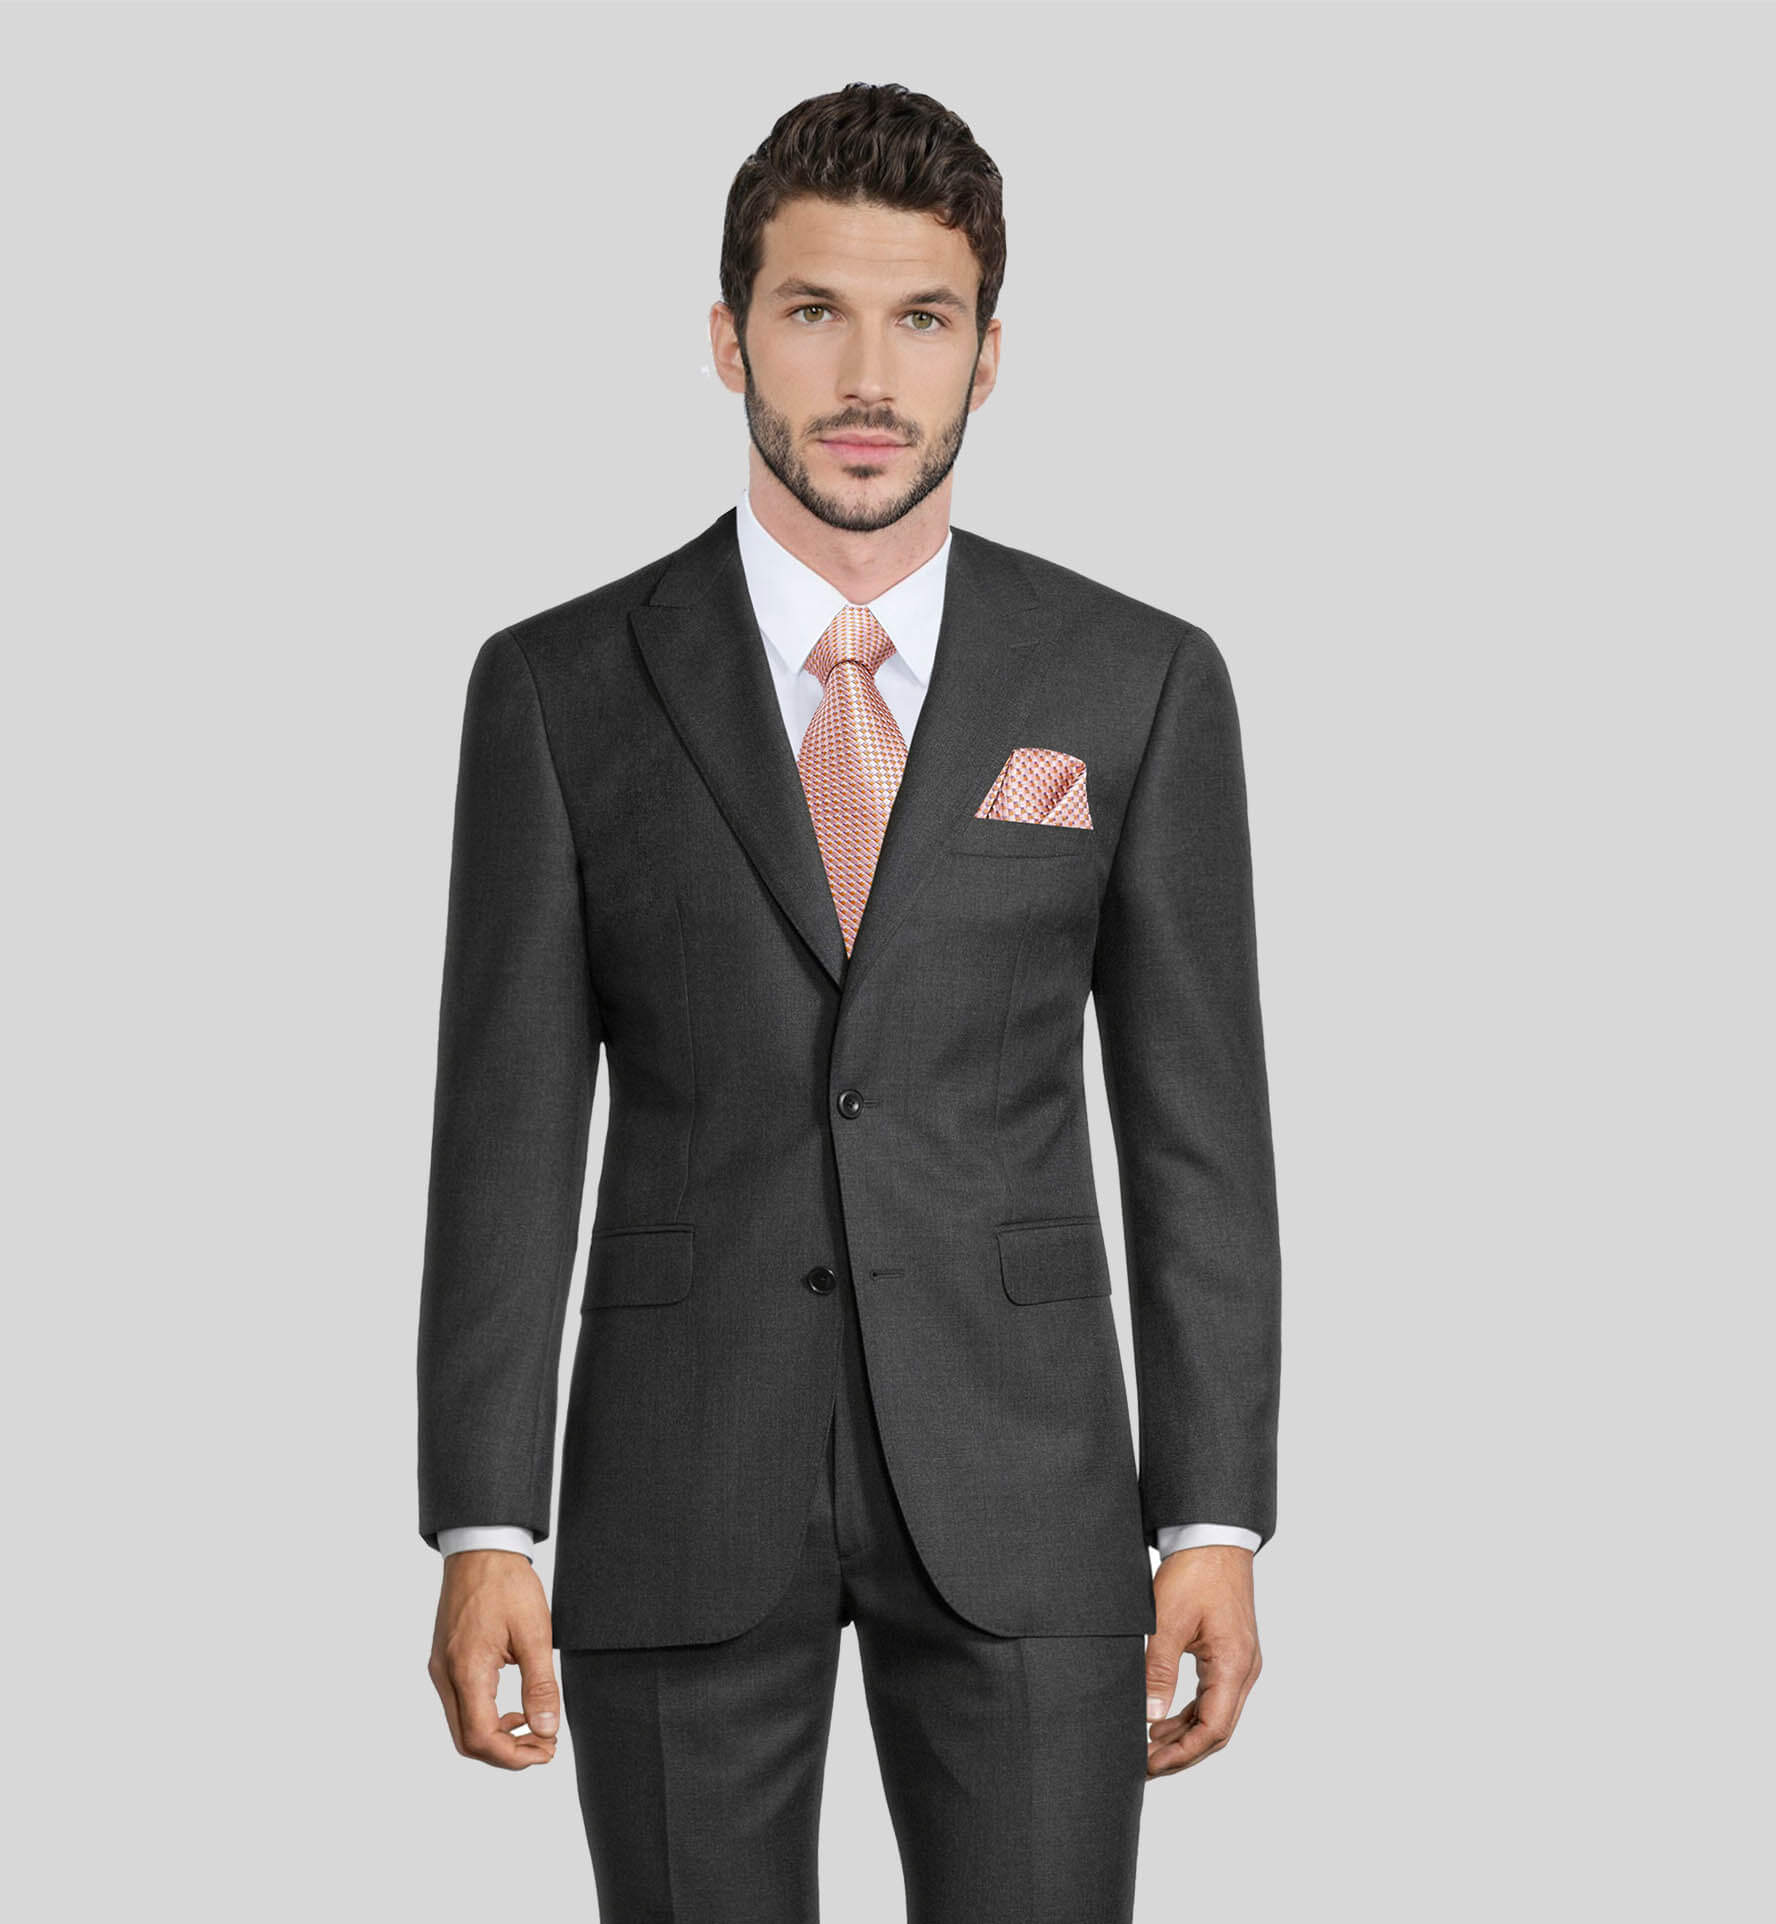 Luxurious Charcoal Grey Suit  Purchase Deluxe Men's Italian Wool Charcoal  Suits - Tomasso Black – Tomasso Black